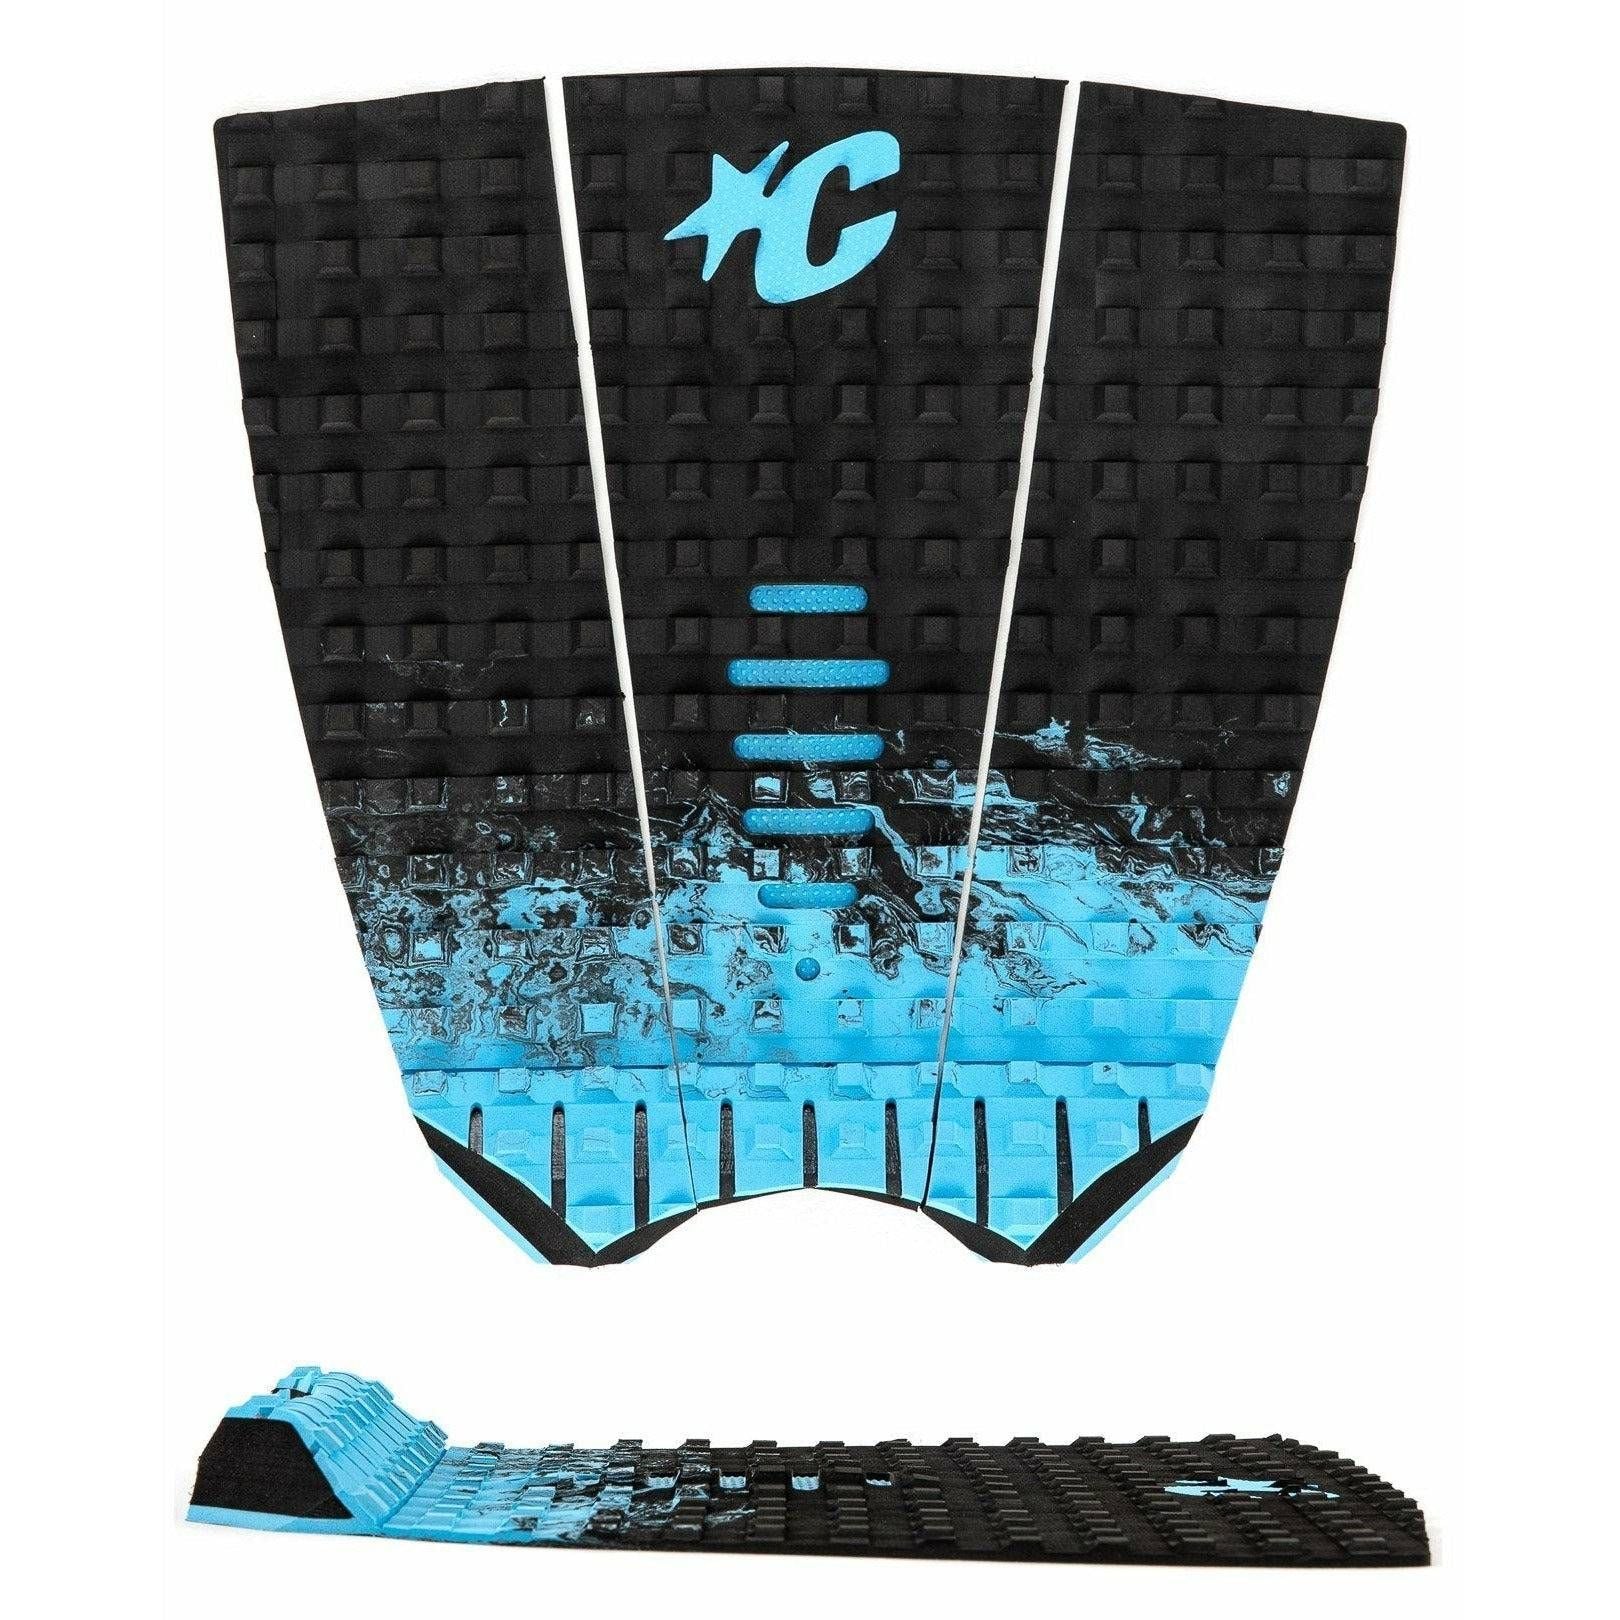 CREATURES OF LEISURE Mick Fanning Performance Traction - Basham's Factory & Surf Shop